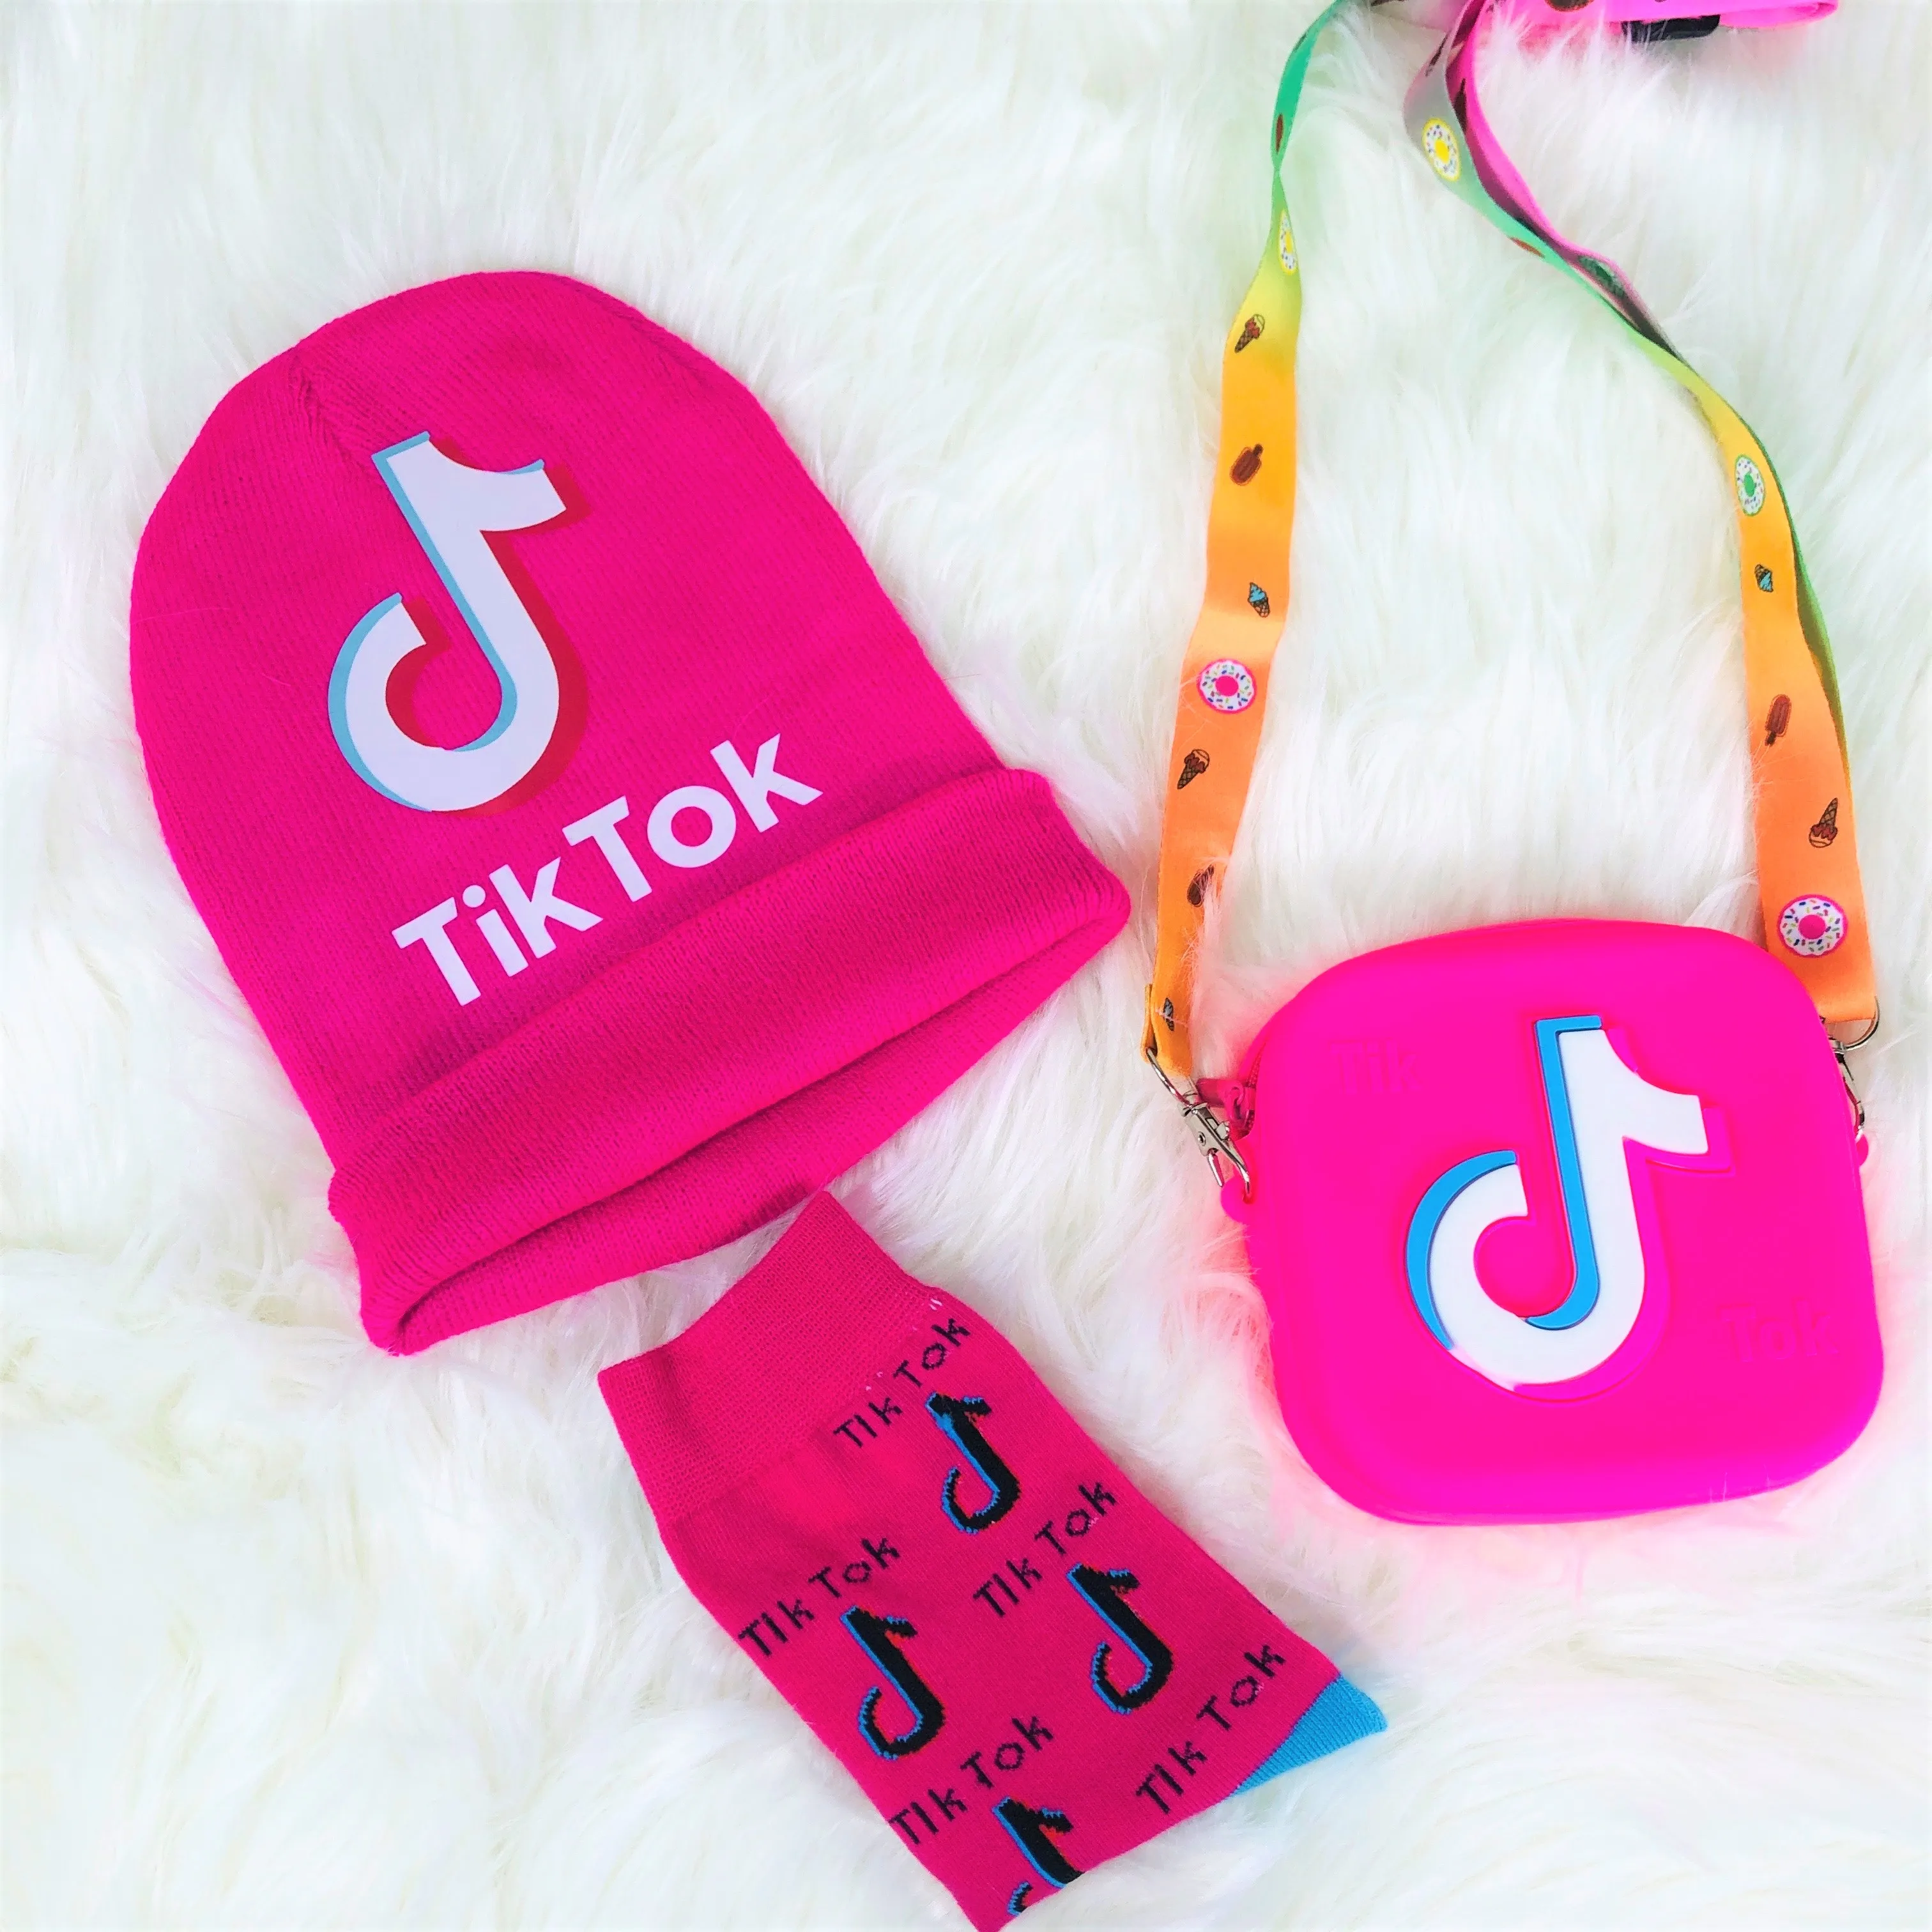 

Hot selling cartoon Tik Tok pattern square bags coin purses for girls socks matching mini silicon tiktok purse and hat set, 6 color